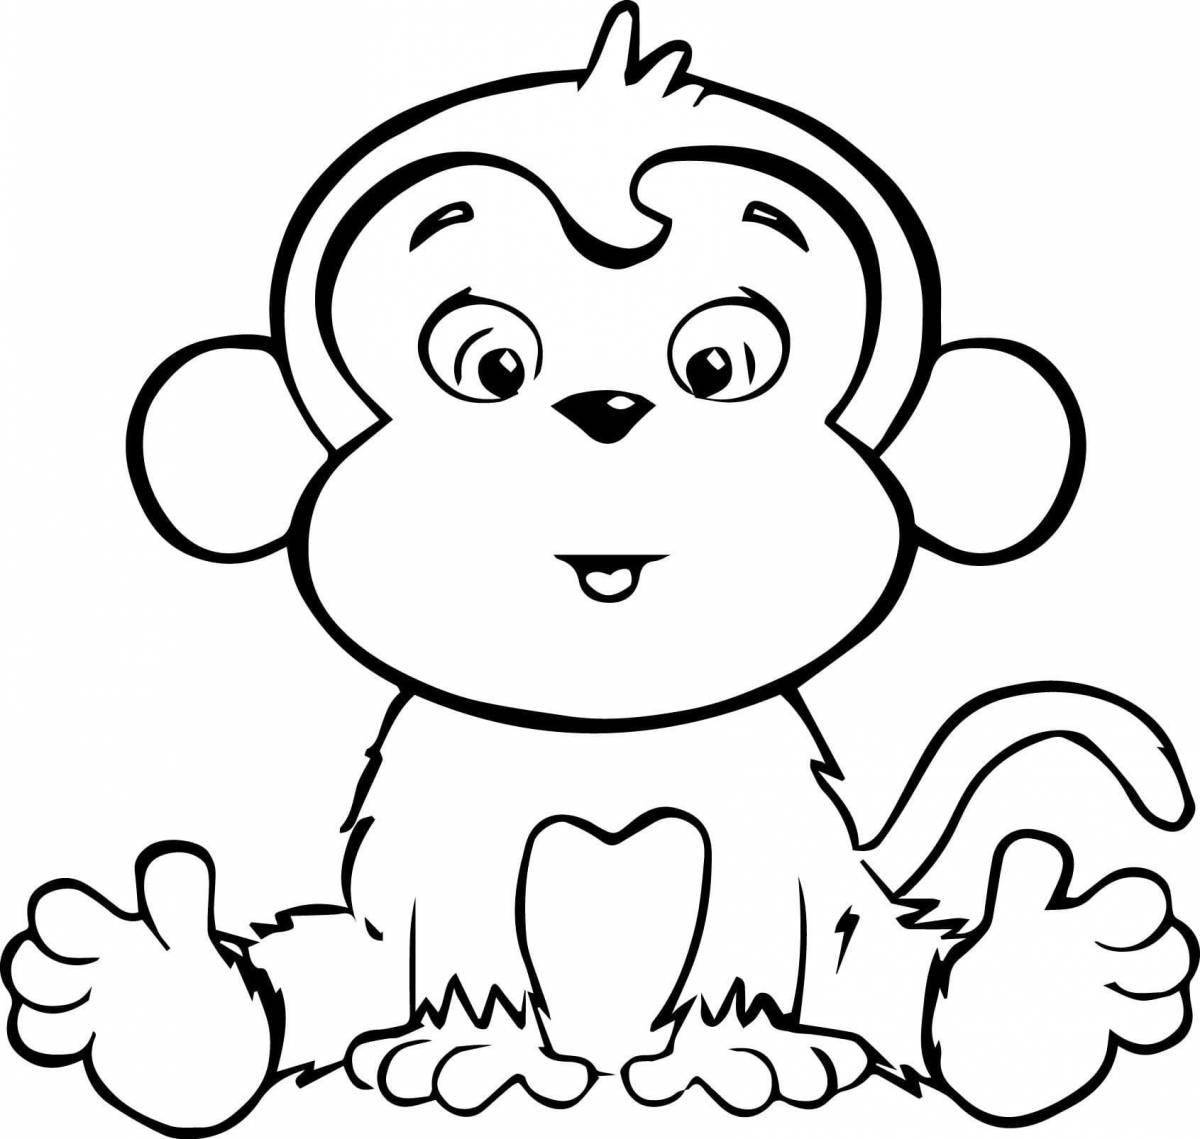 Fun coloring pages animals for kids